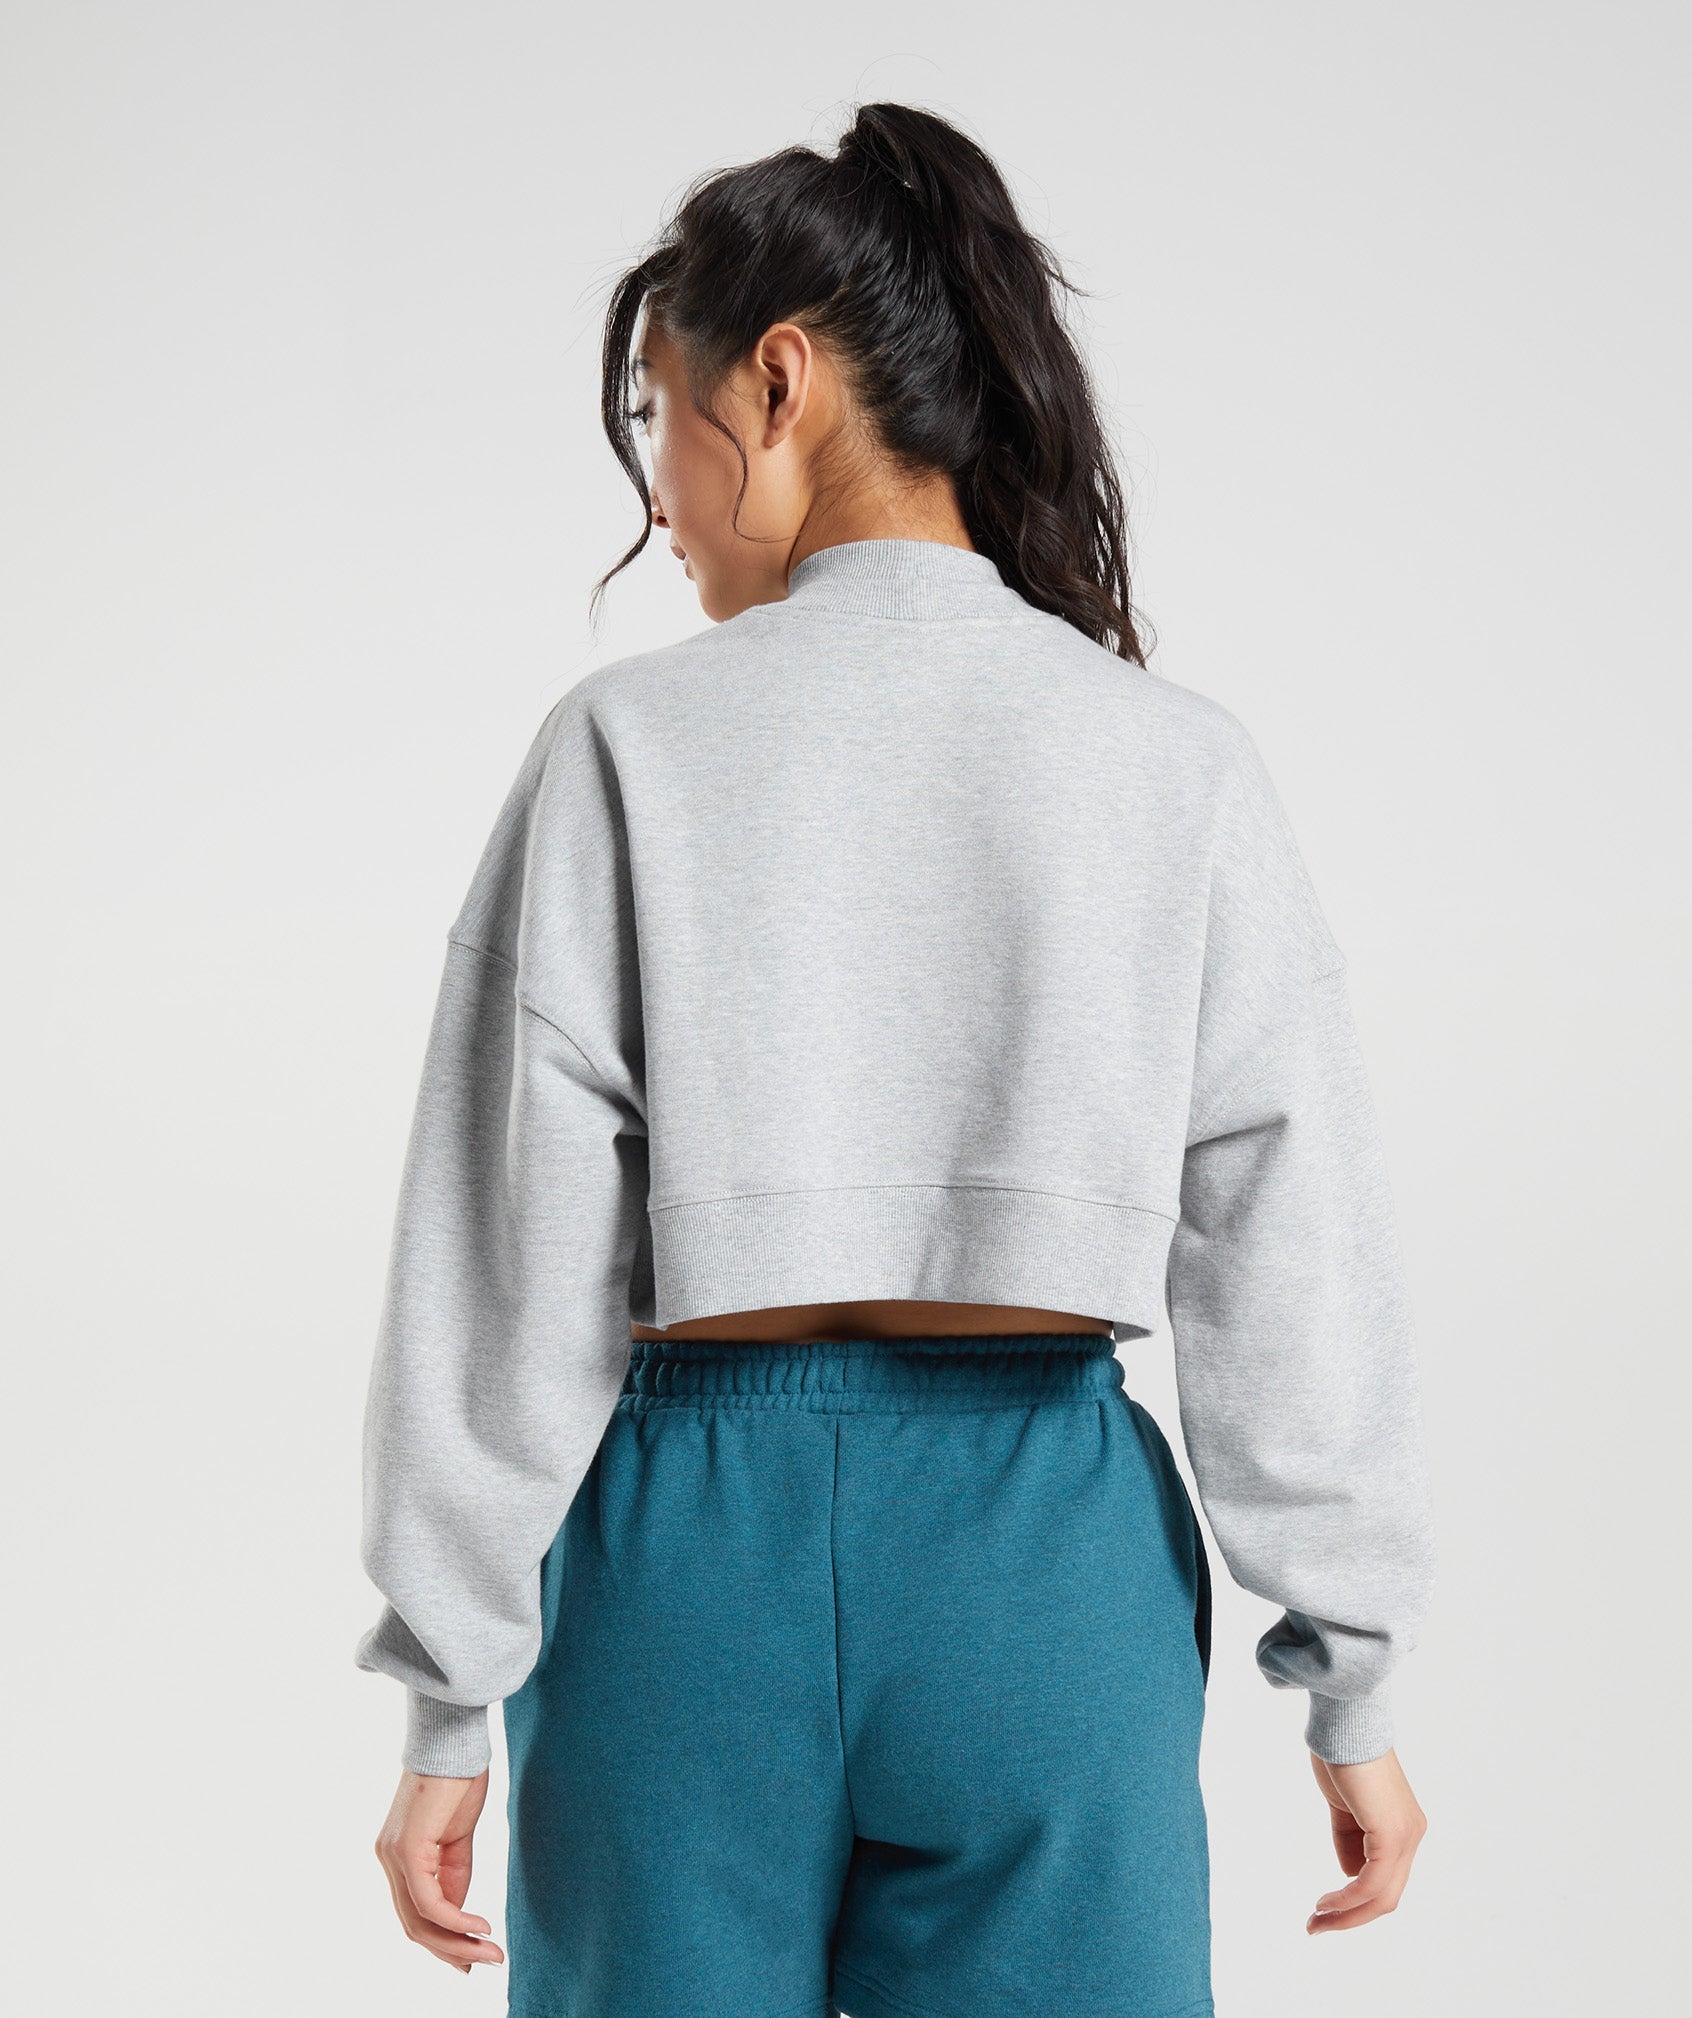 Rest Day Sweats Cropped Pullover in Light Grey Core Marl - view 2